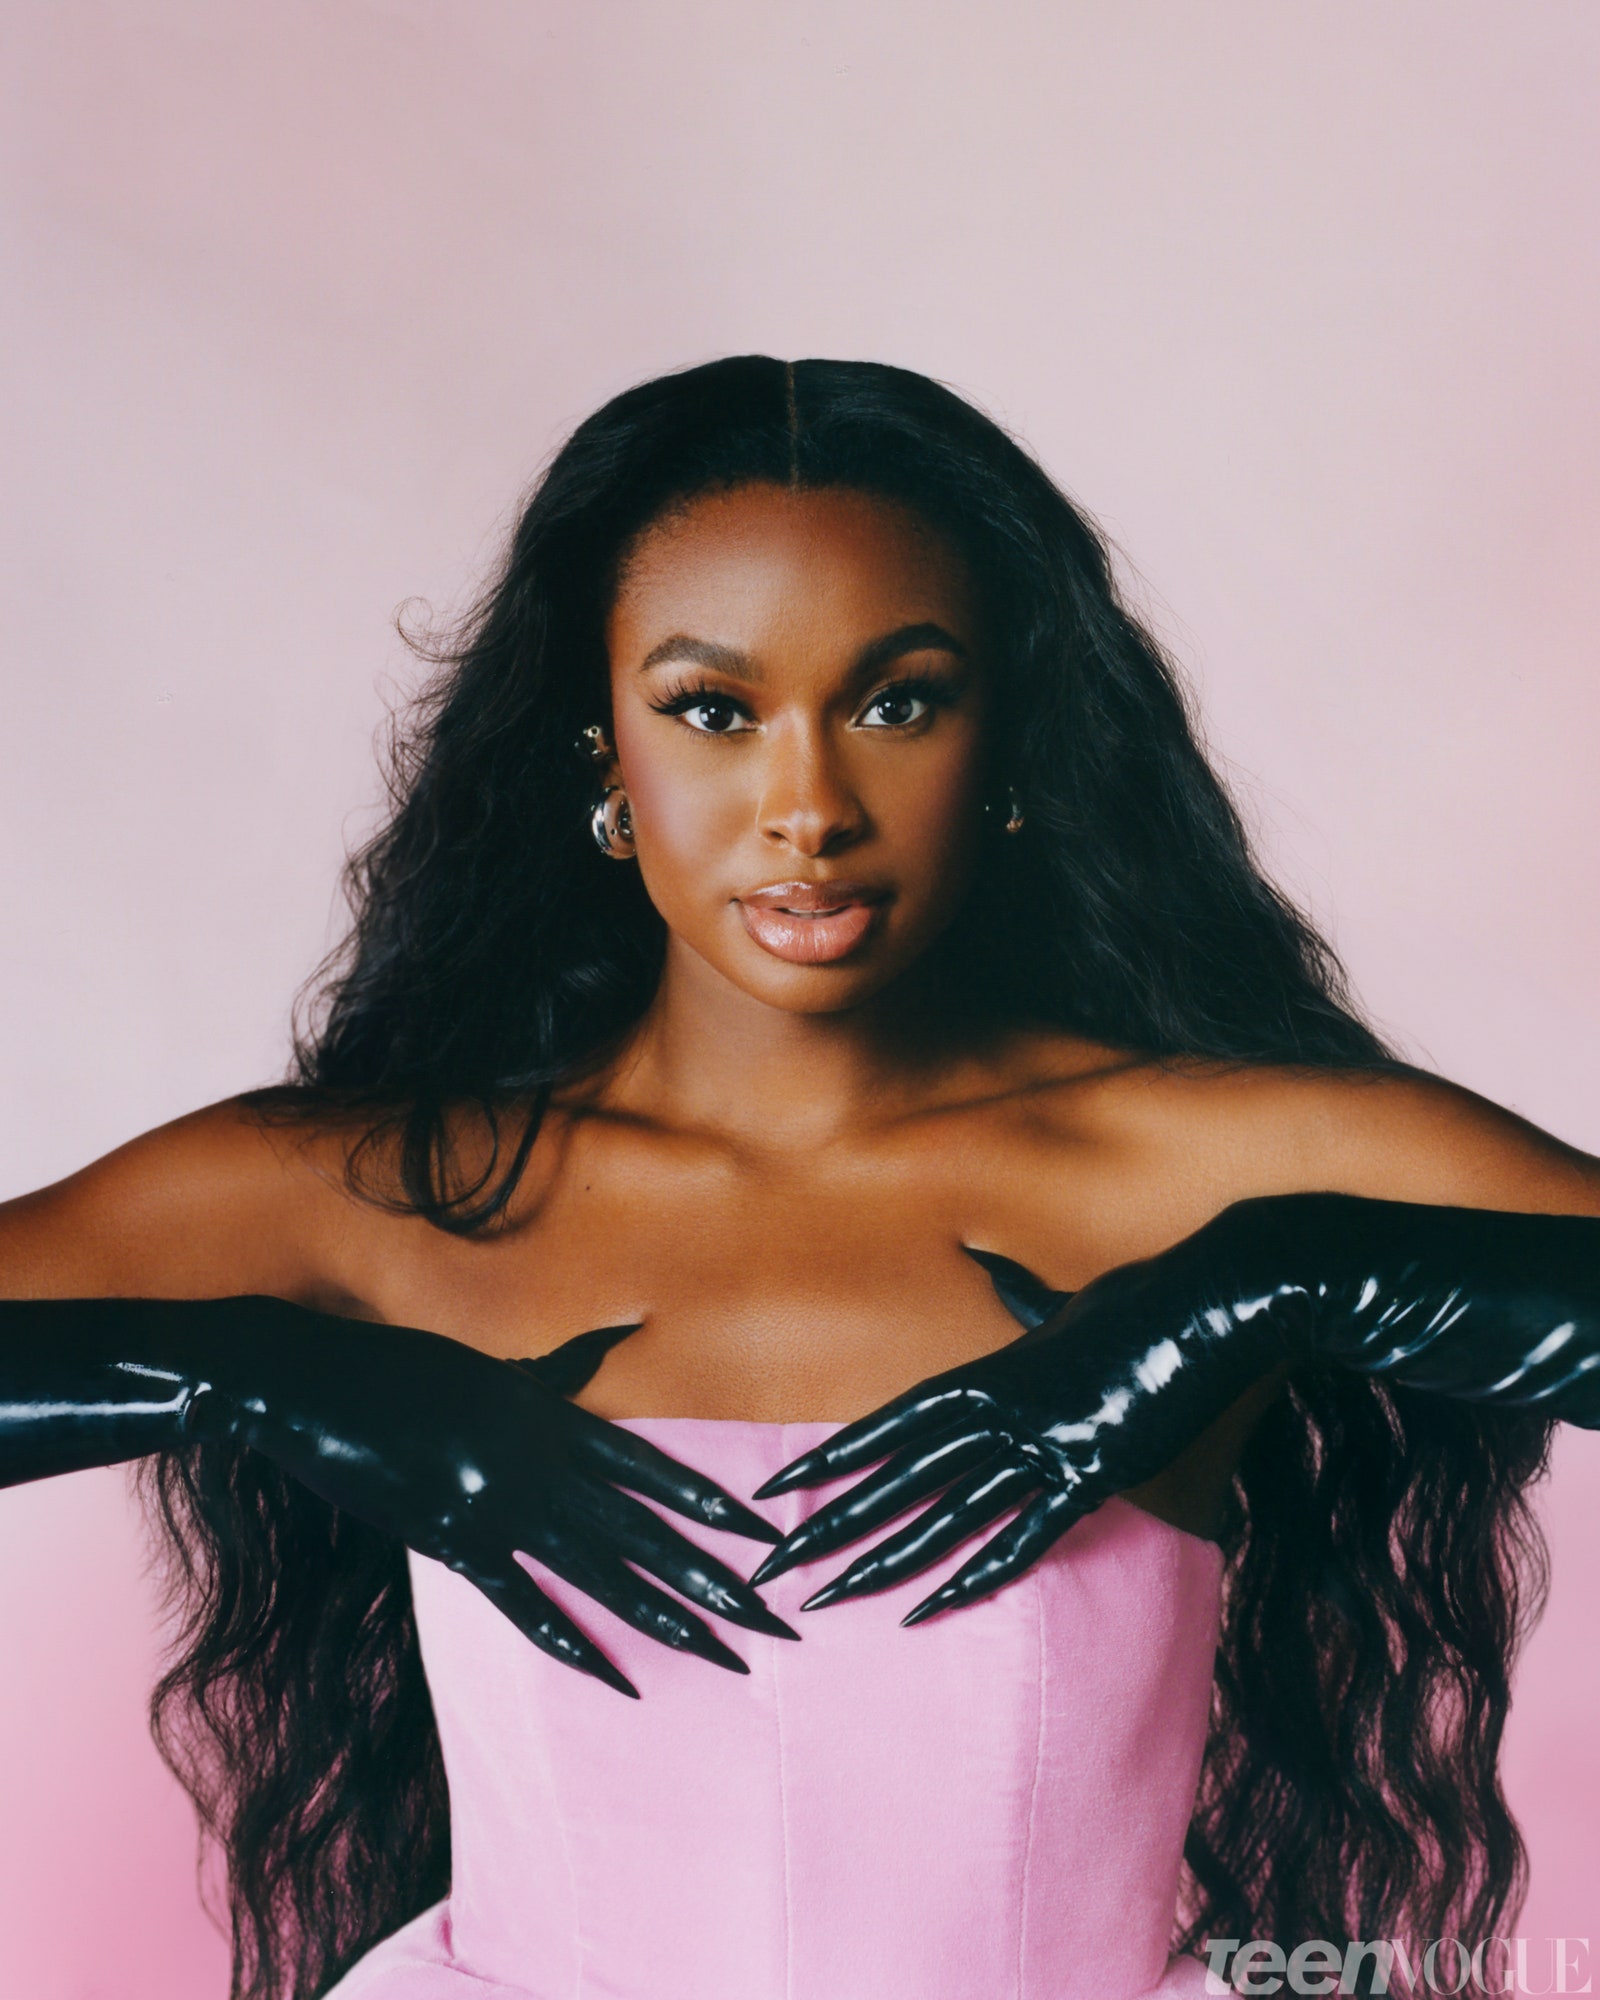 Coco Jones against a pink background wearing a pink dress and black latex gloves